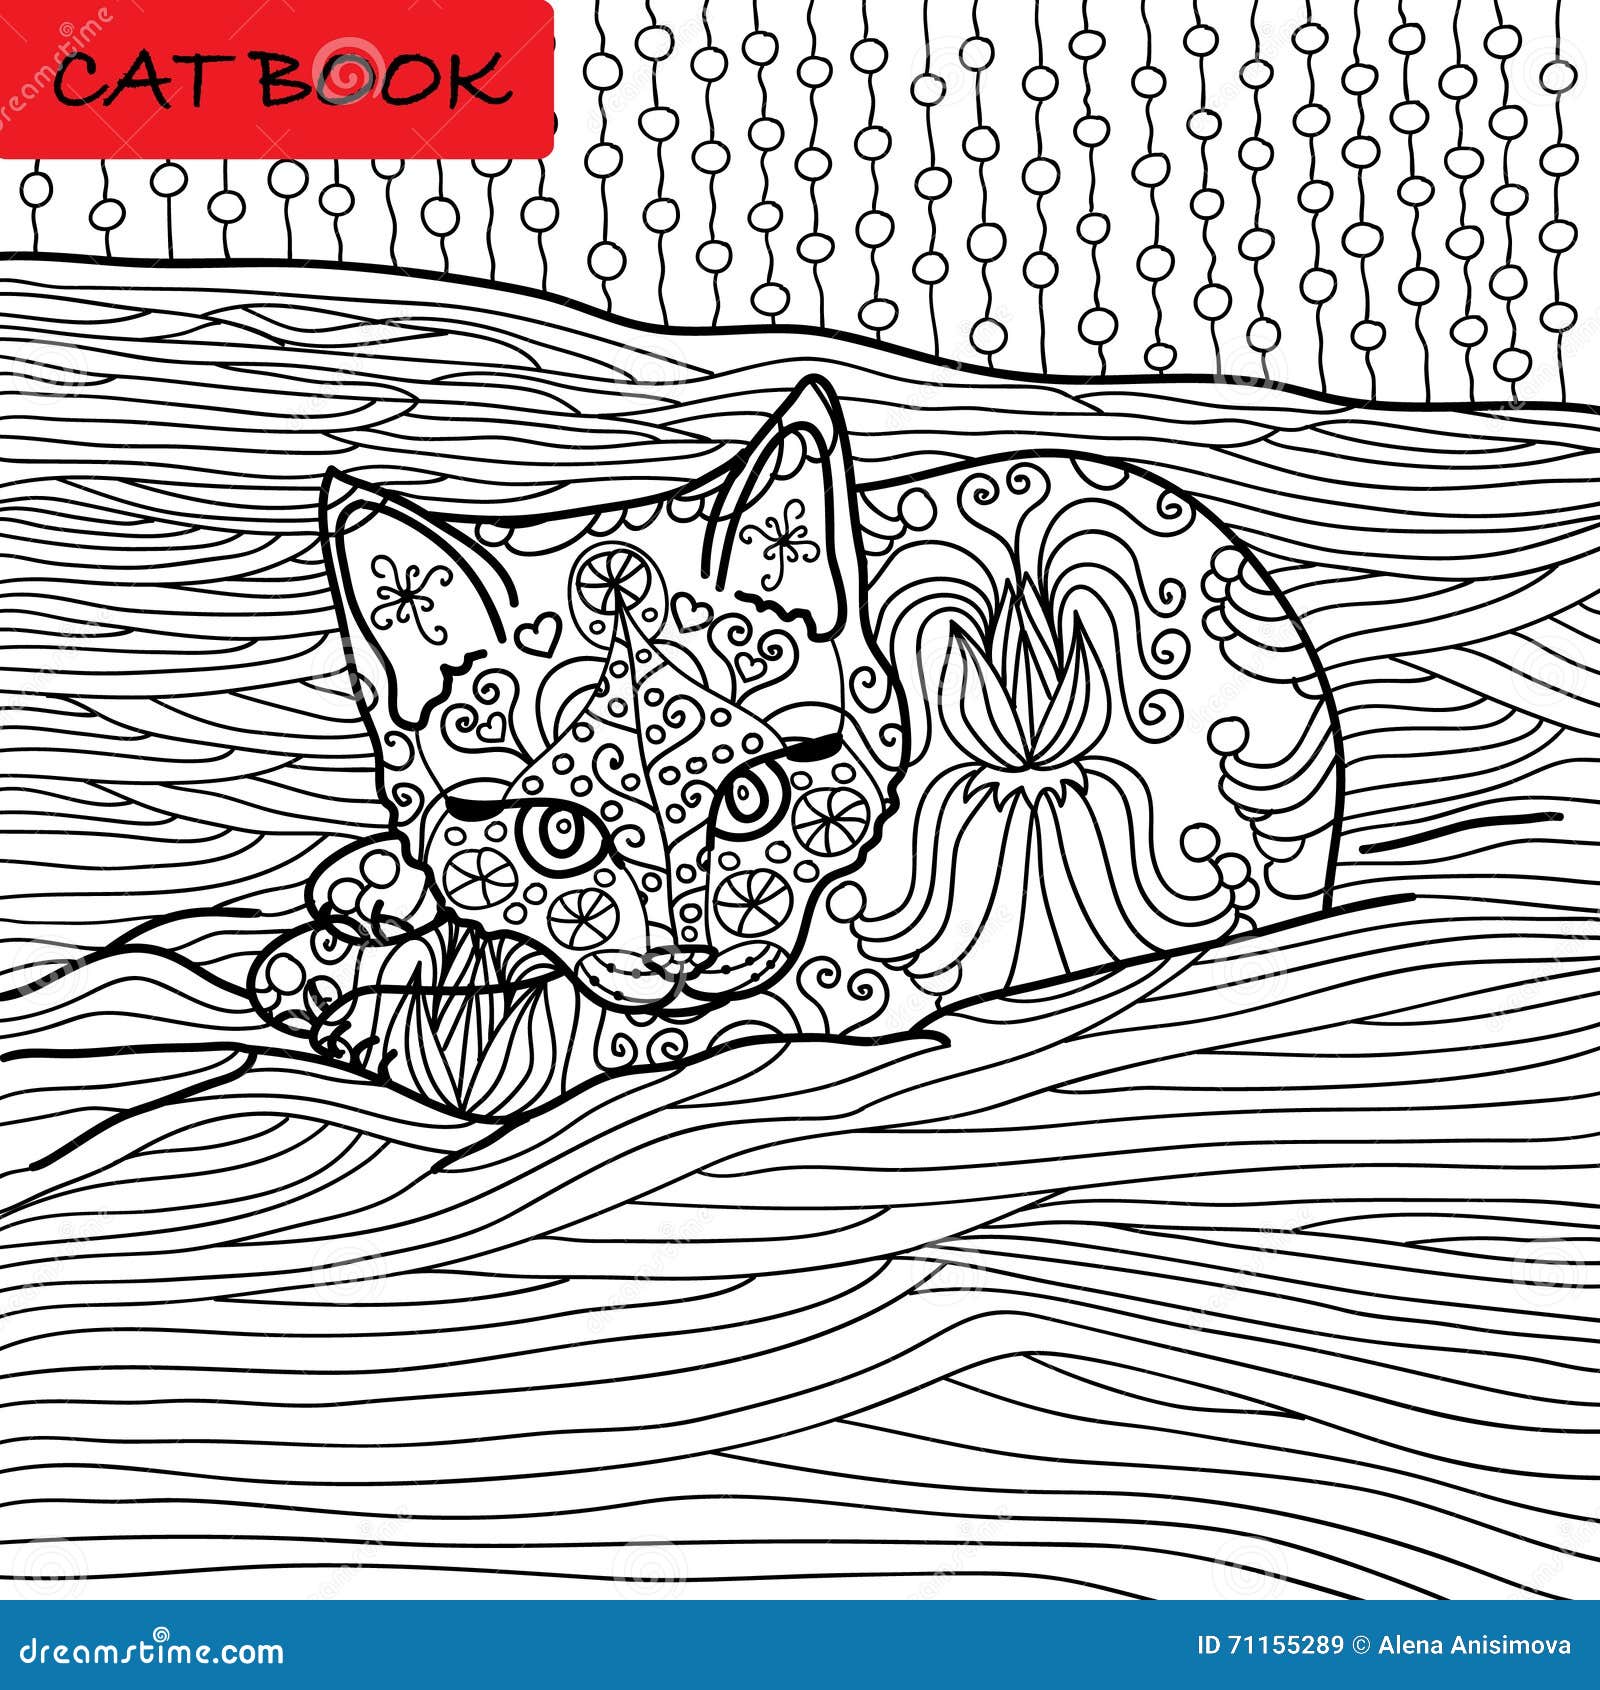 Download Coloring Cat Page For Adults. Adorable Baby Kitten Lying ...